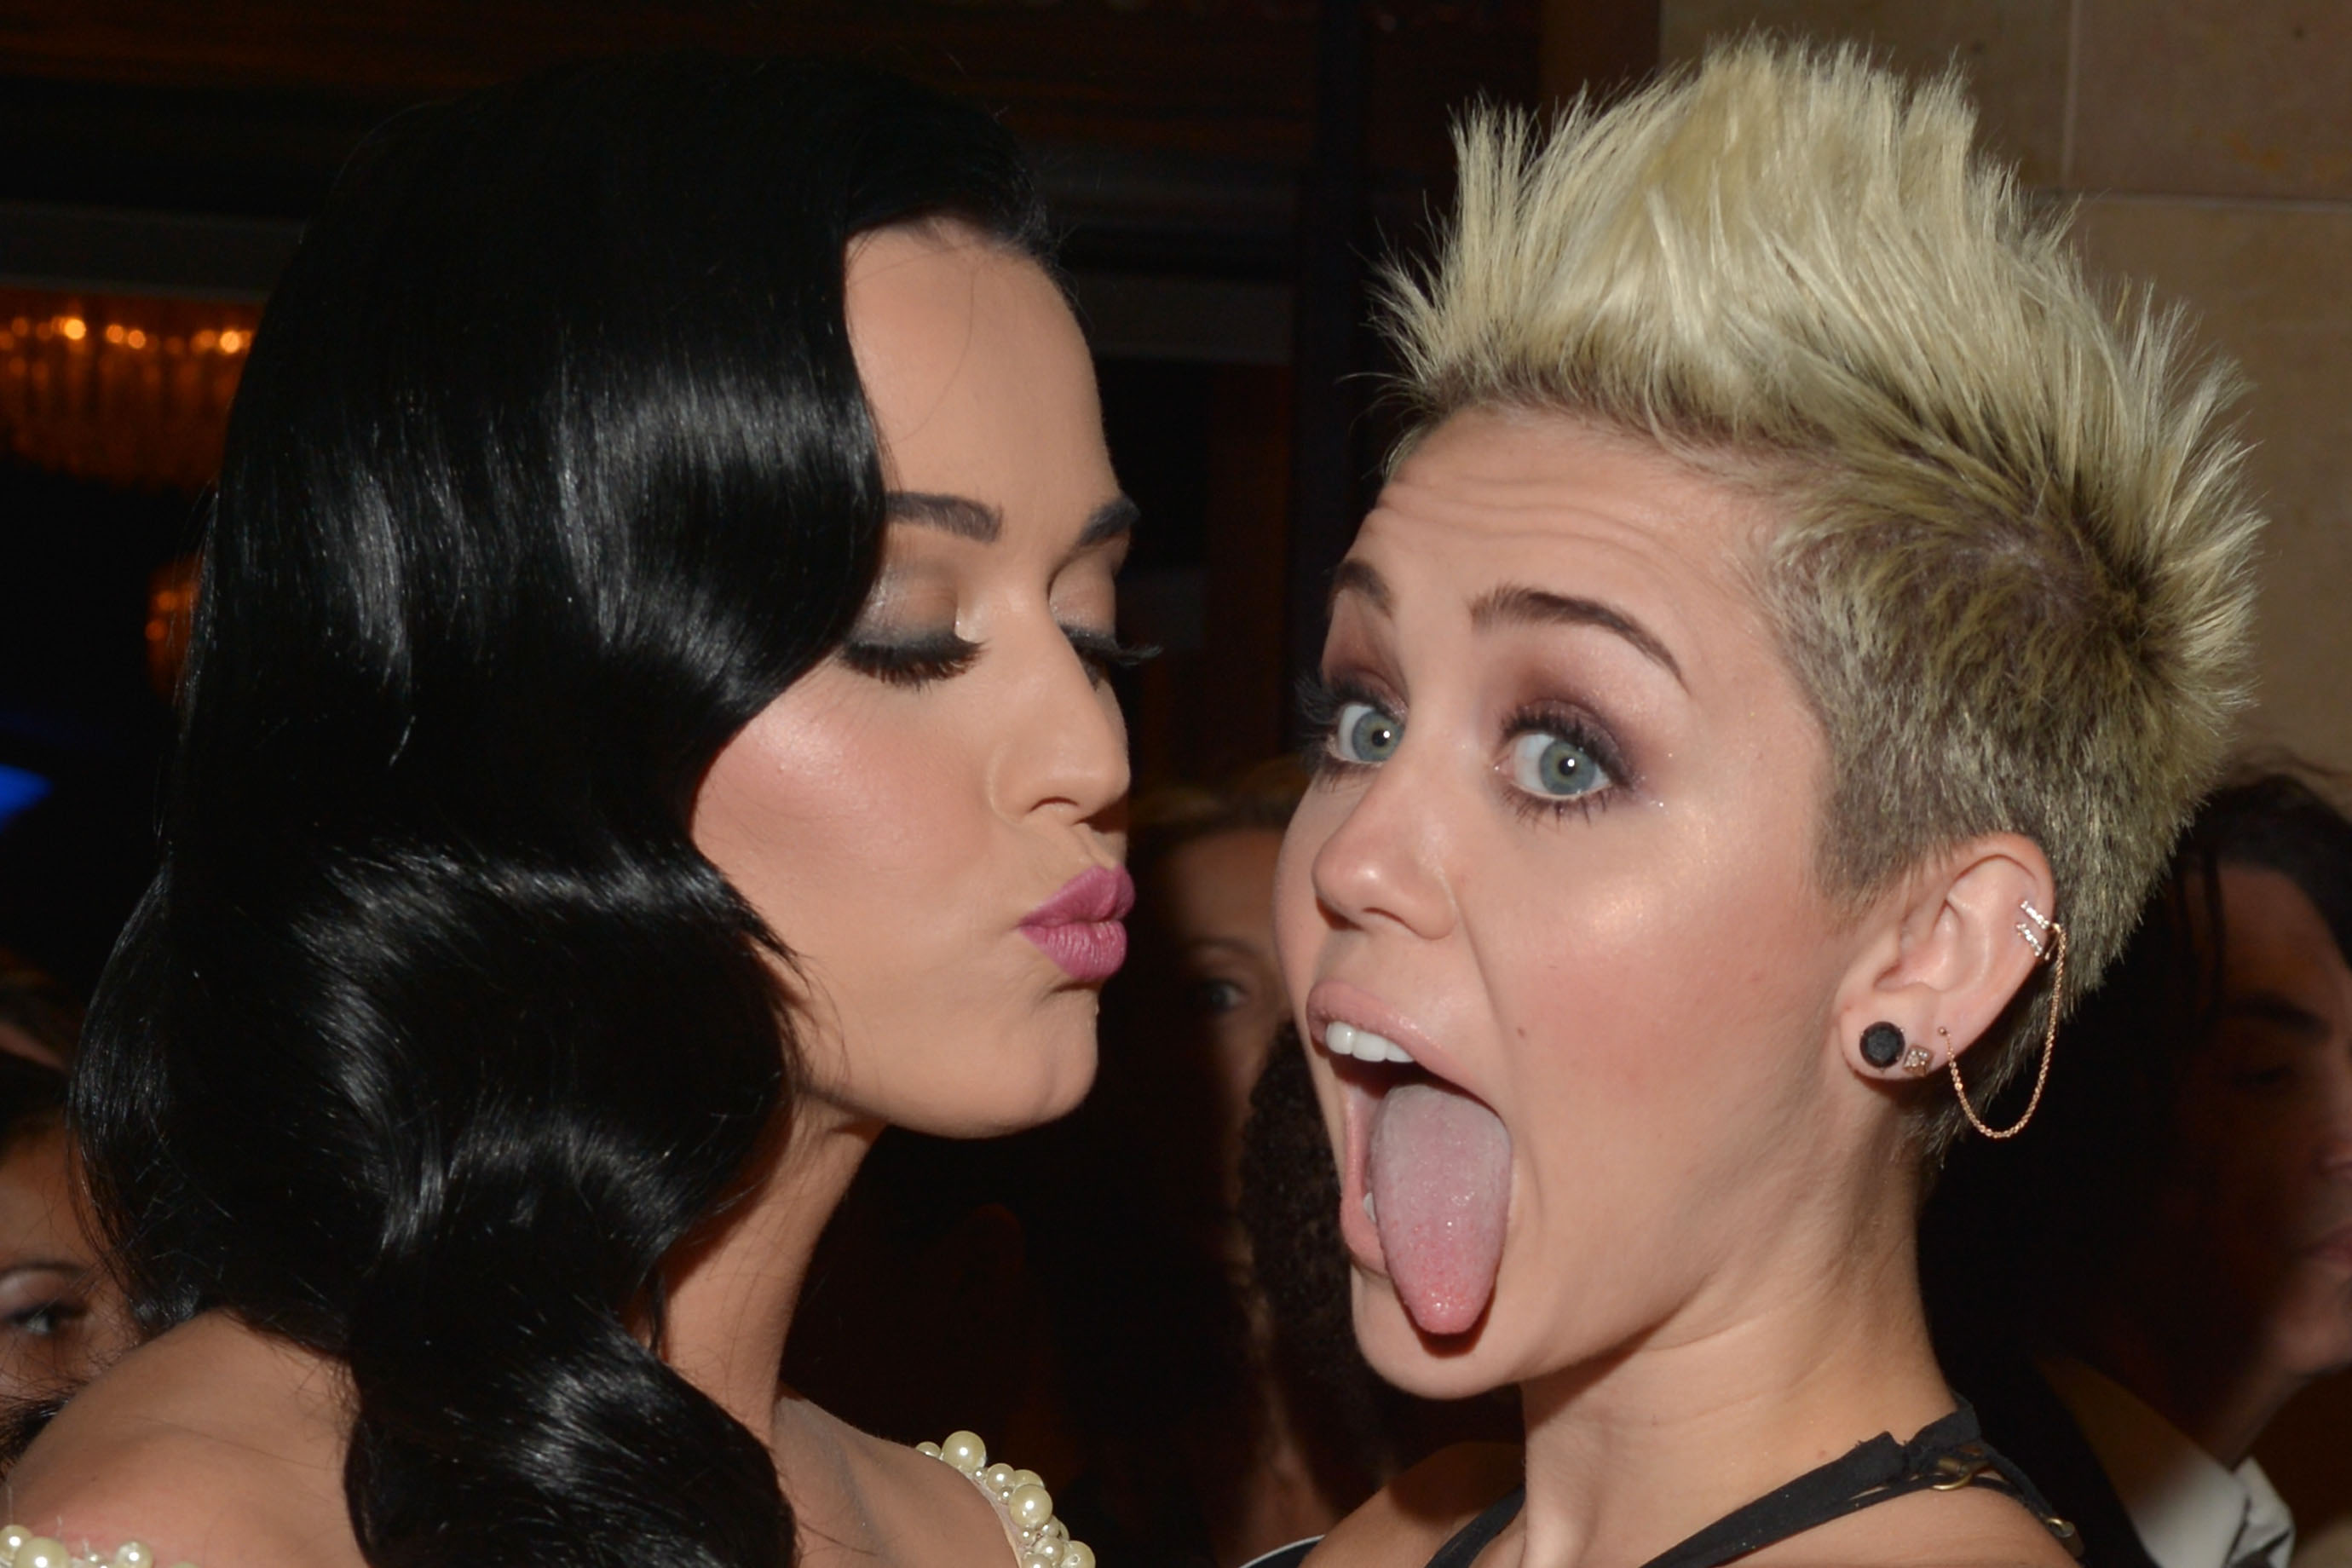 Miley Cyrus and Katy Perry at the Grammy's 2013